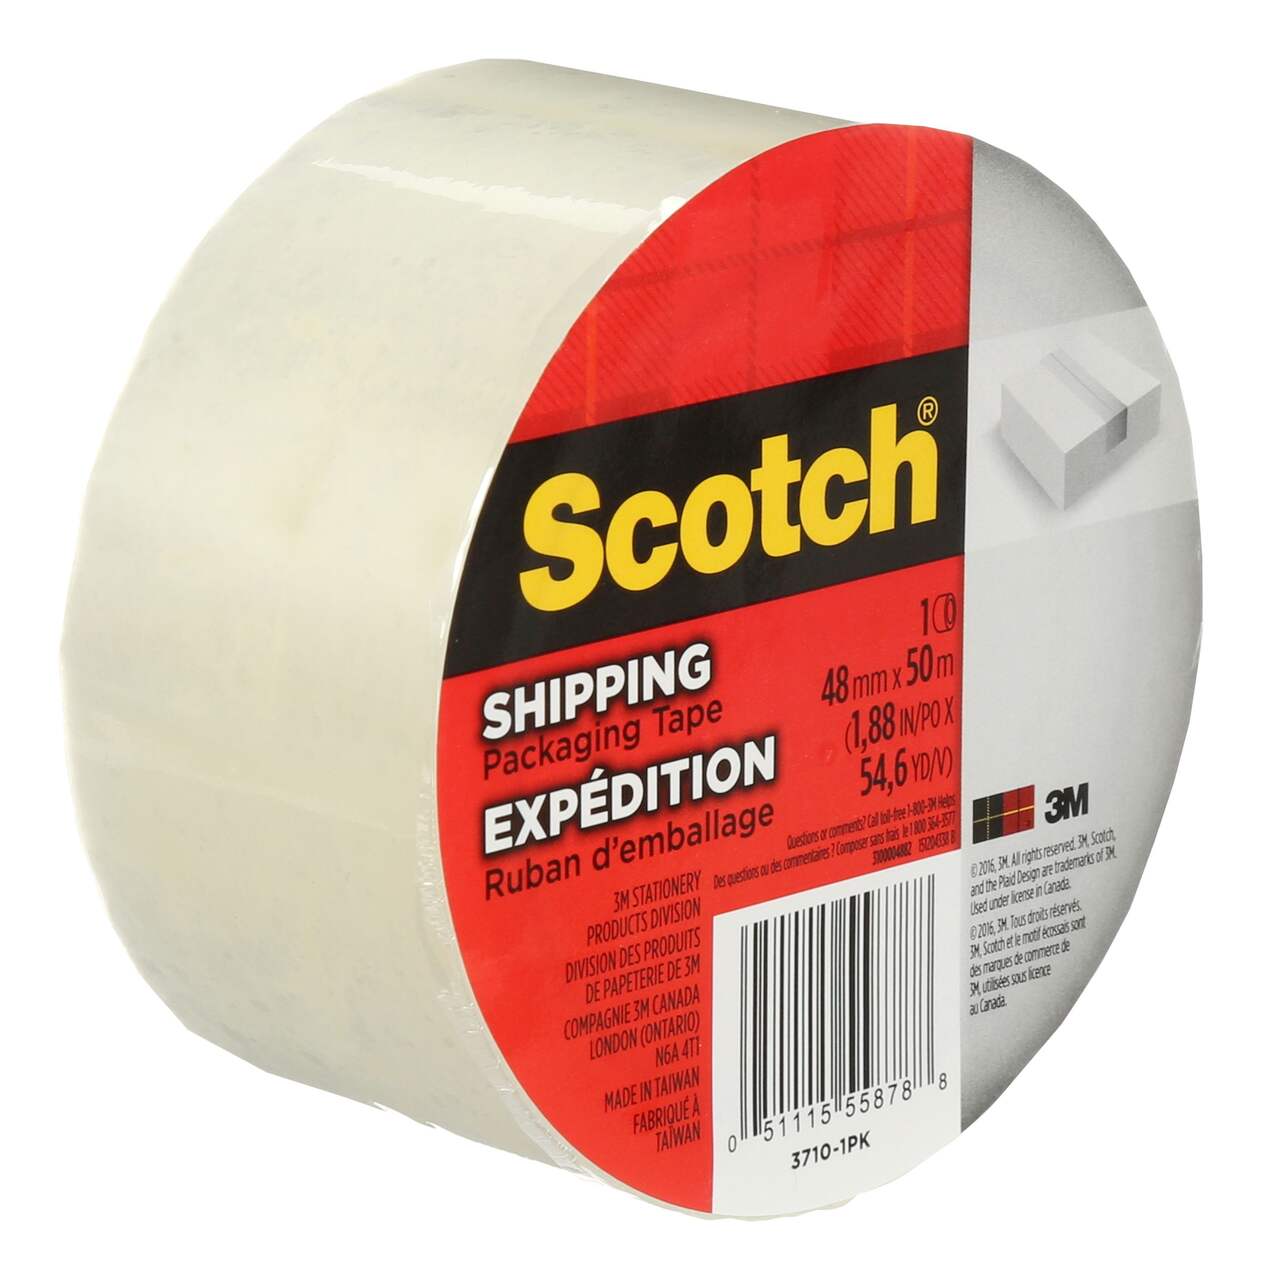 https://media-www.canadiantire.ca/product/fixing/paint/surface-prep-maintenance/0670026/scotch-packaging-tape-48mm-x-50m-1-88-x-54-6-yds--4b7eb9f7-3a87-4d52-9a54-2ab801e22eb3-jpgrendition.jpg?imdensity=1&imwidth=640&impolicy=mZoom